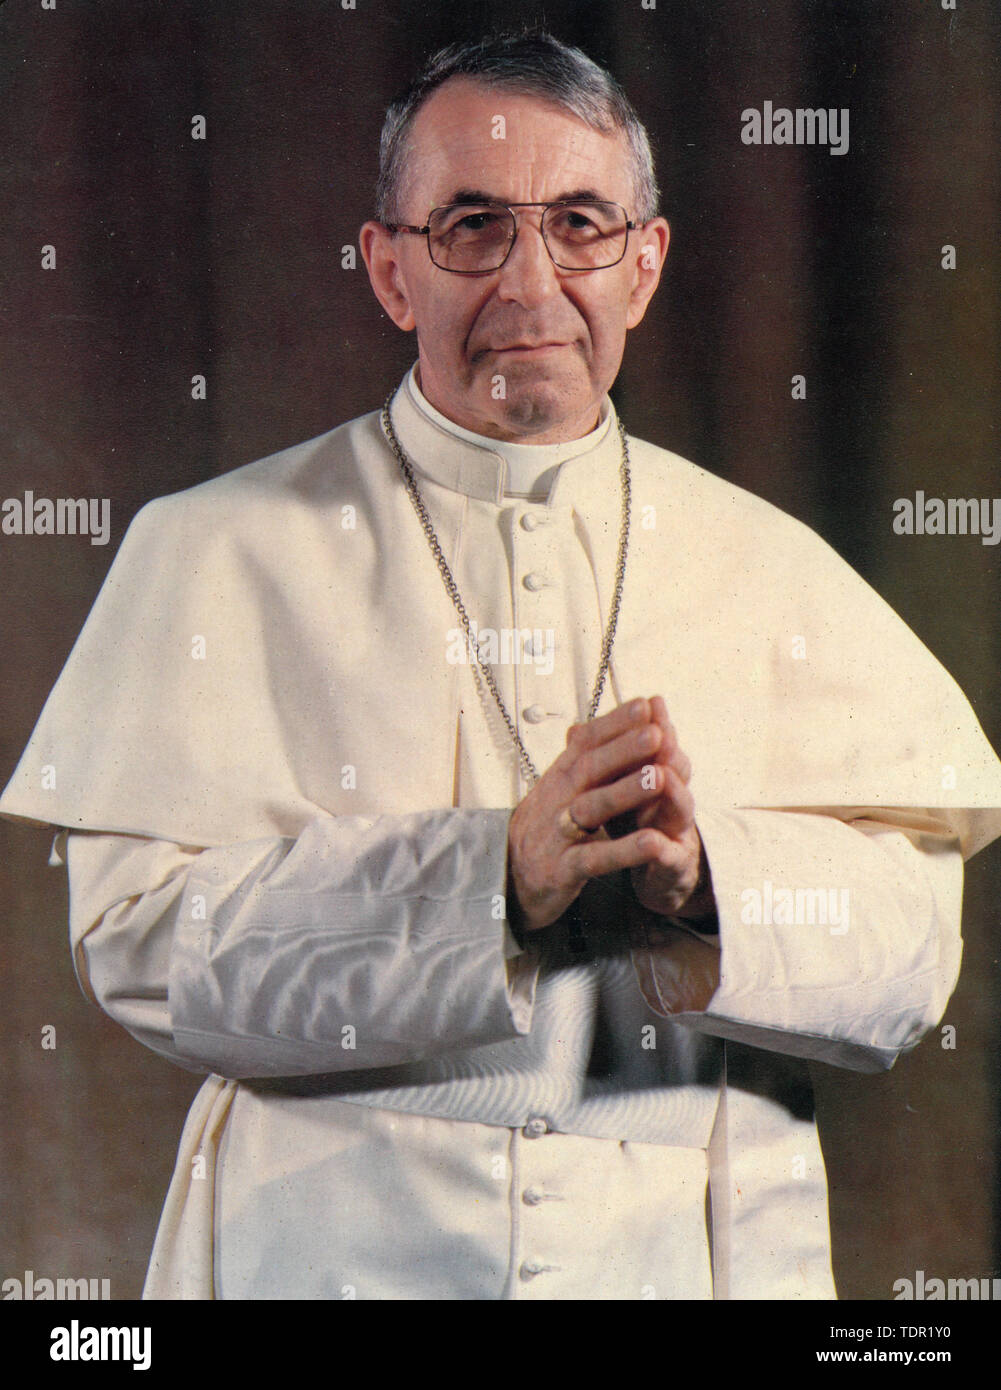 John paul i hi-res stock photography and images - Alamy